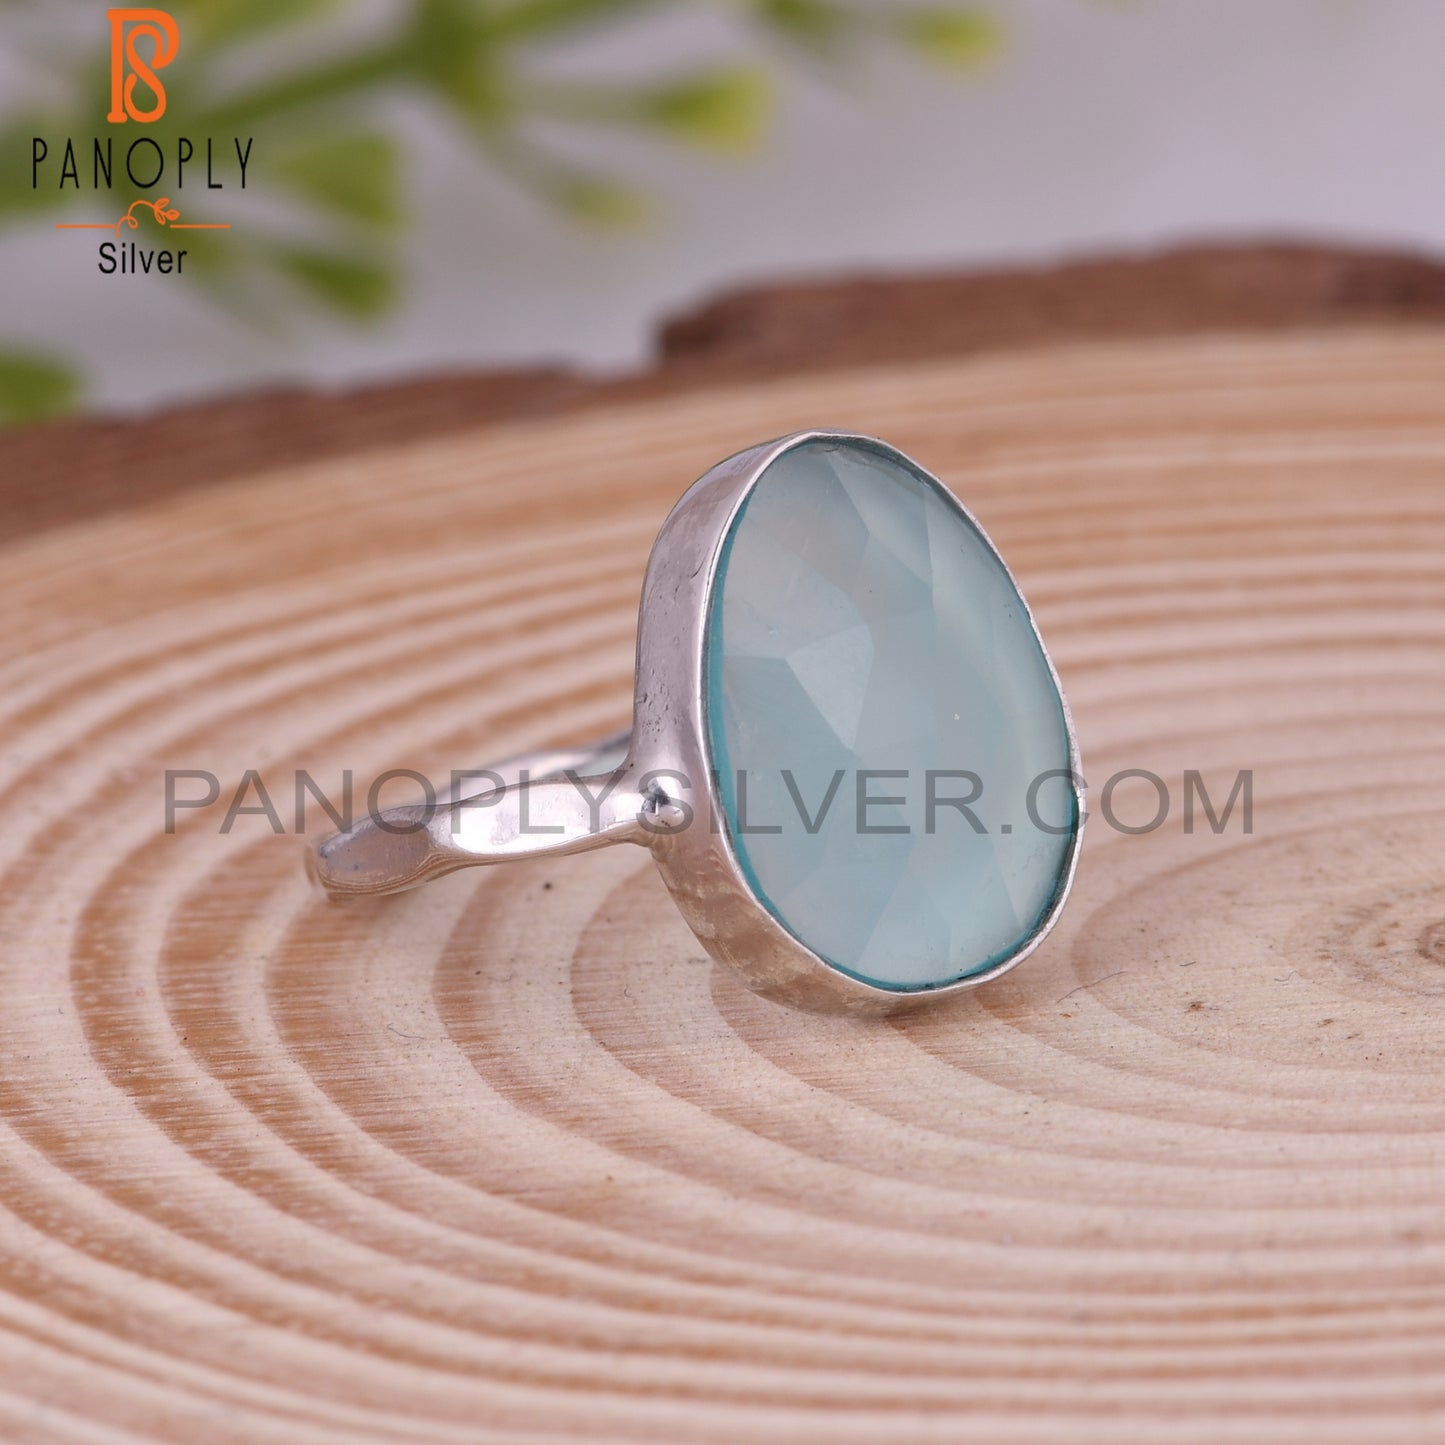 Natural Attractive Aqua Chalcedony 925 Sterling Silver Rings